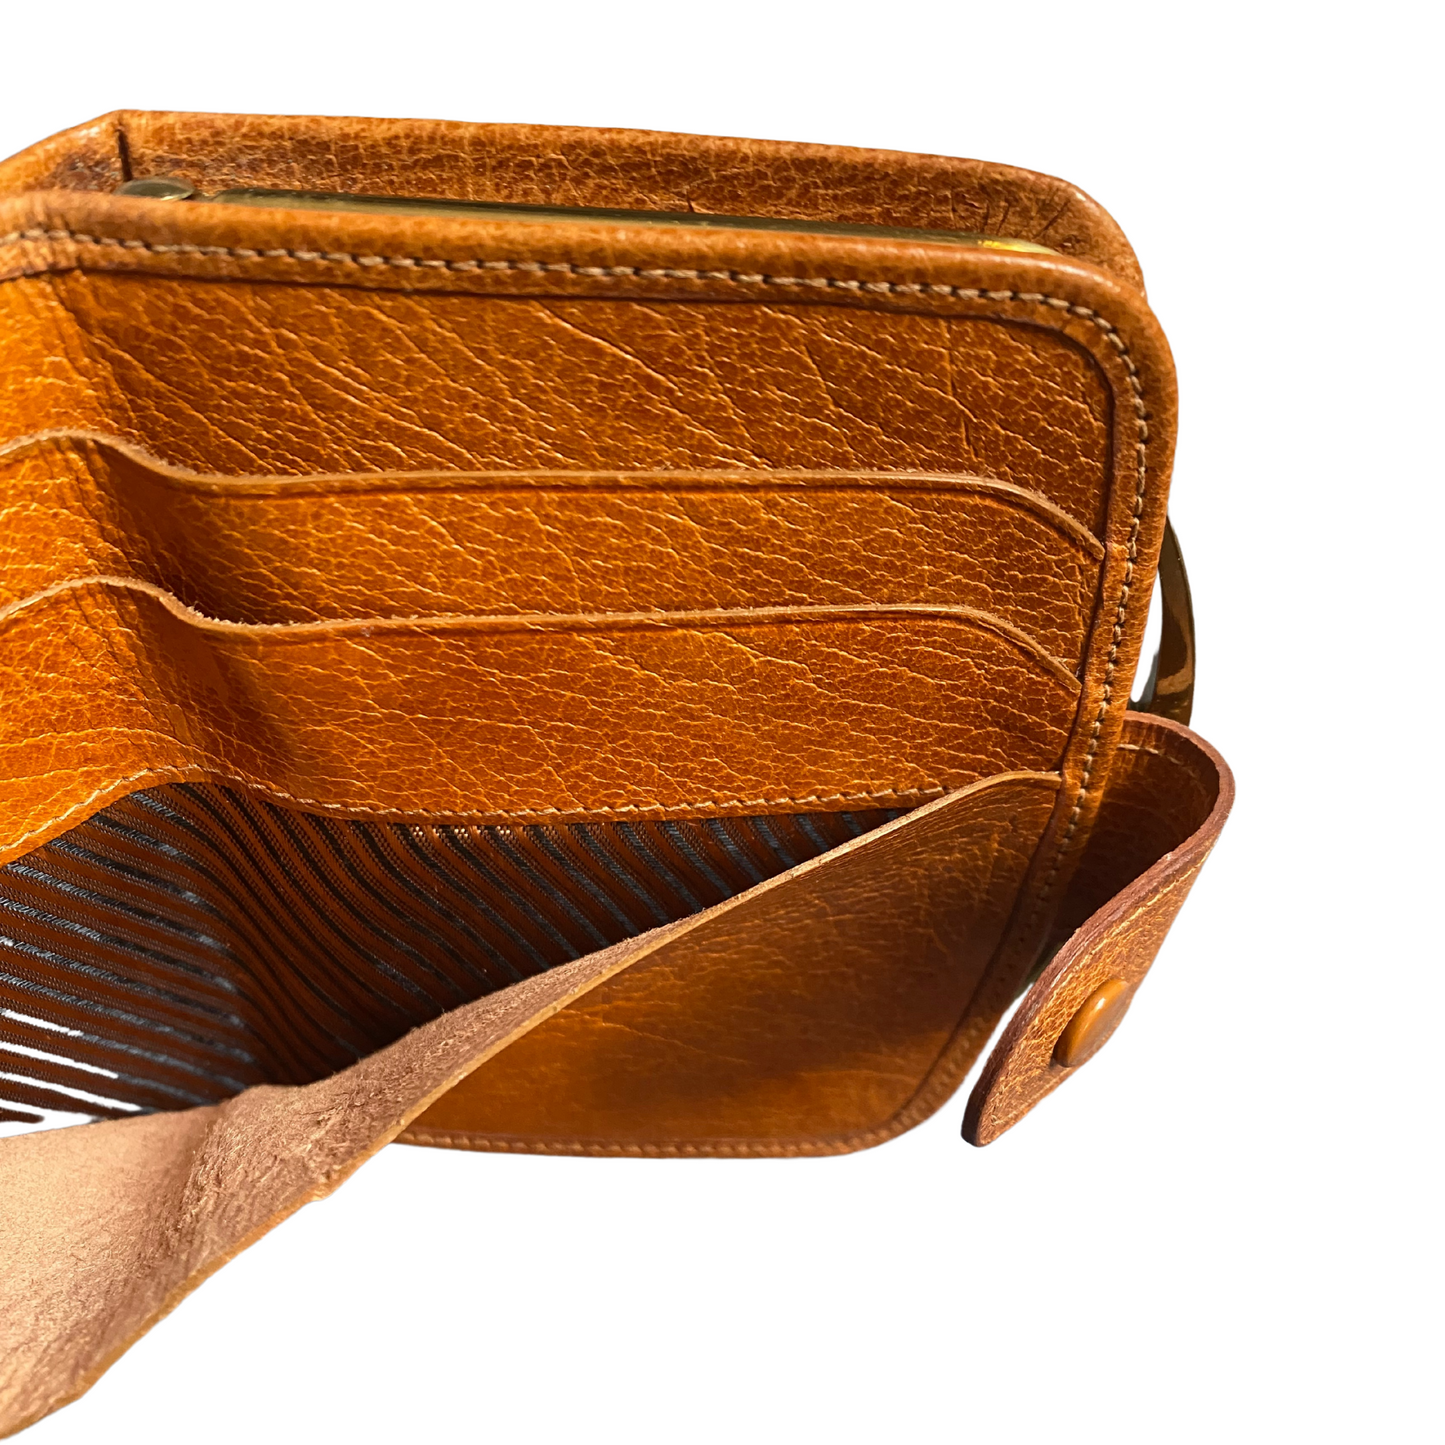 British-made real leather purse/wallet with ample space for essentials